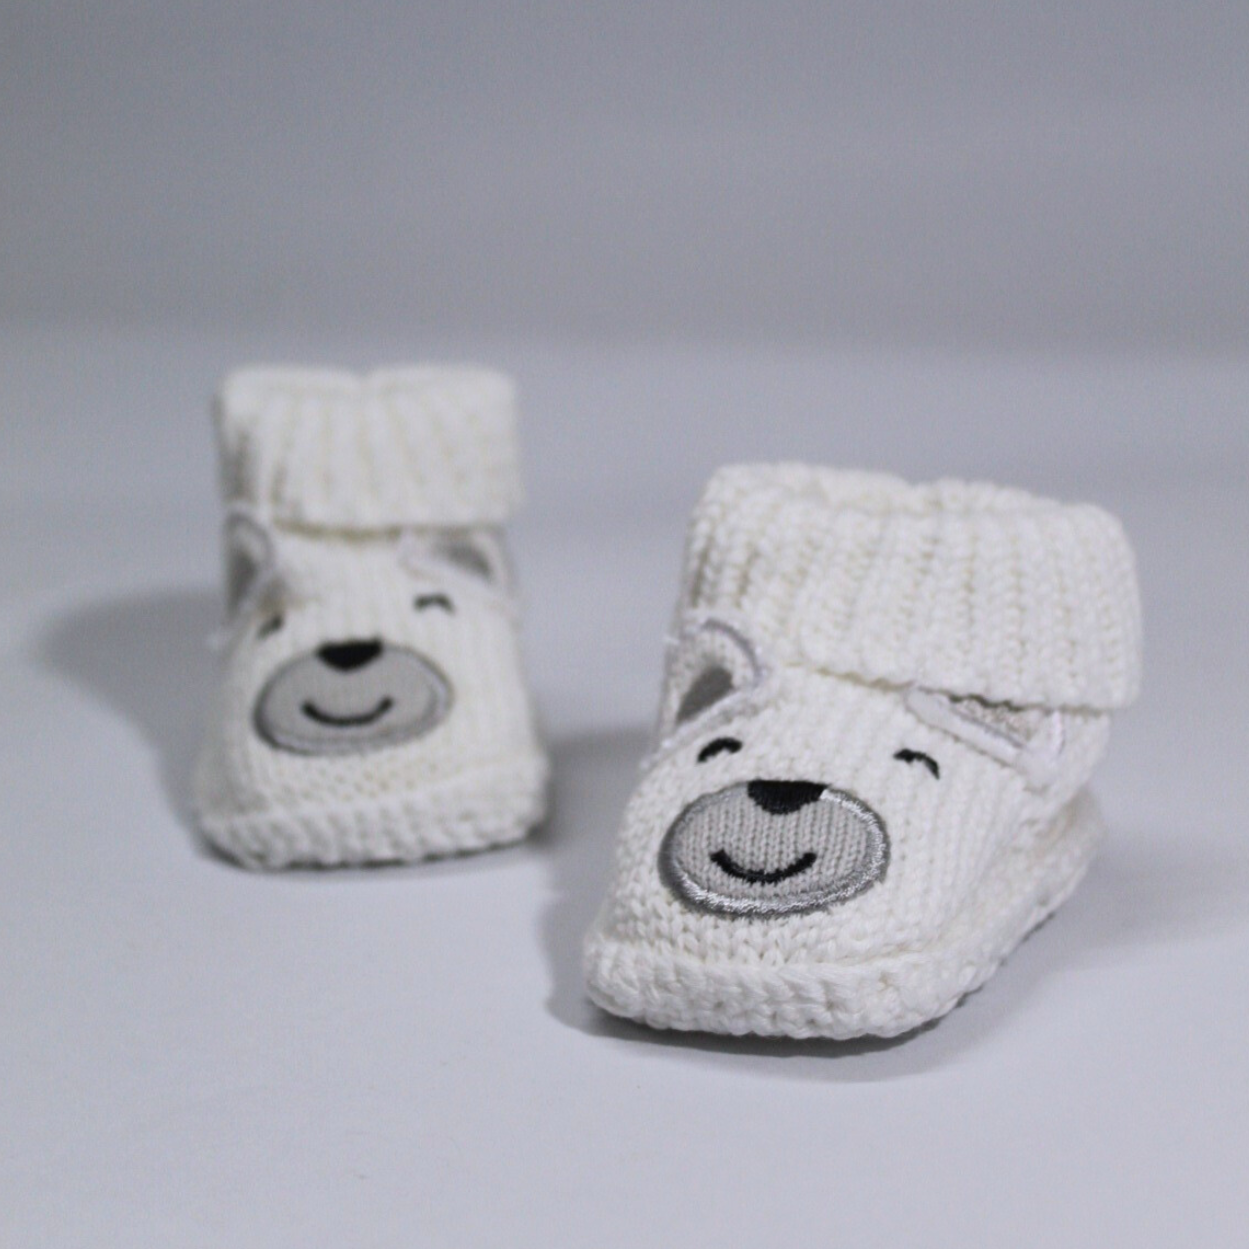 Baby Booties-white